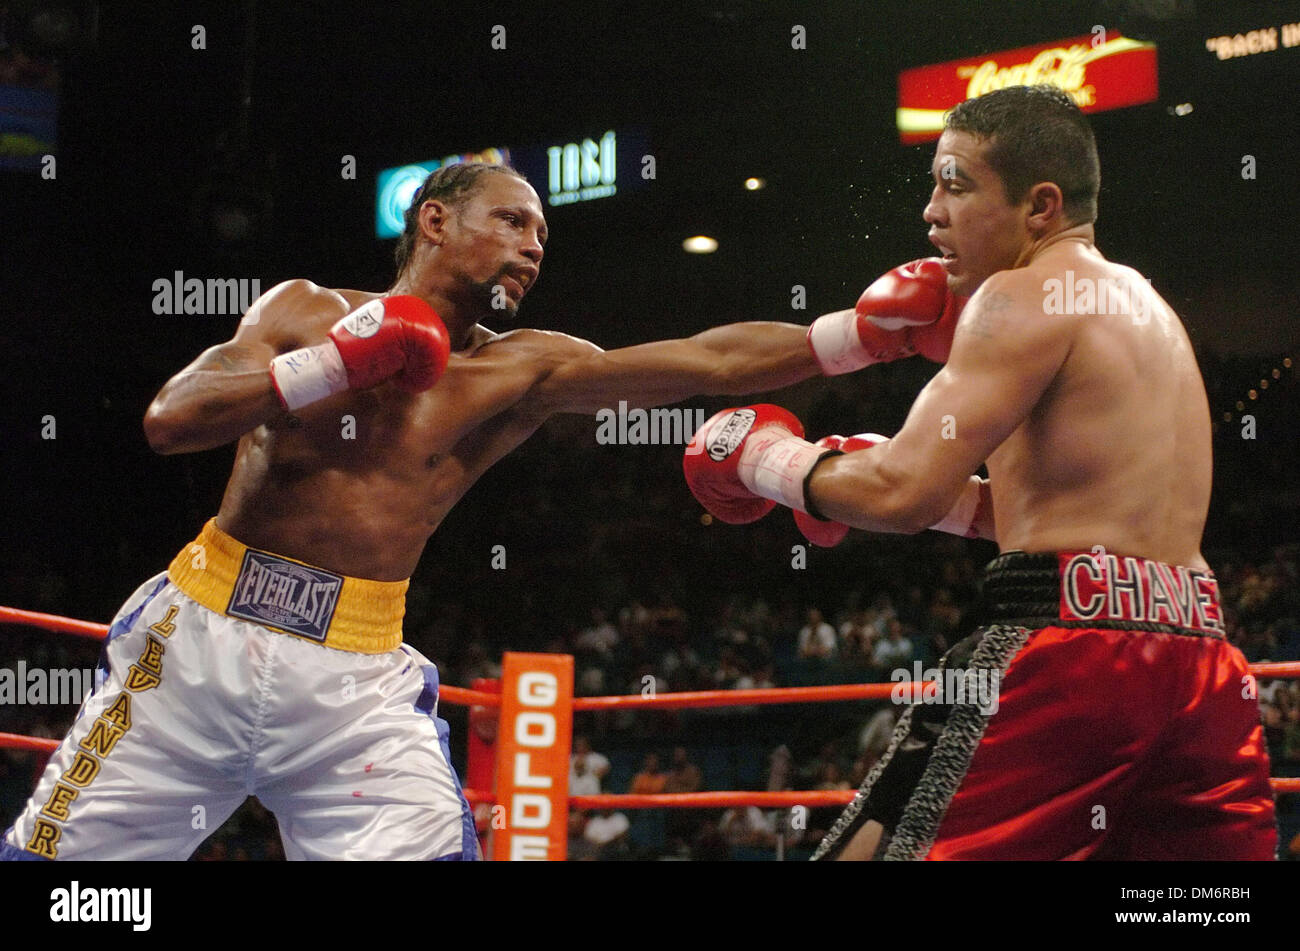 Sep 22, 2005; Las Vegas, NV, USA; FILE PHOTO. LEAVANDER JOHNSON (35) has died Sept 22, 2005 of brain injuries (subdural hematoma) five days after he was rushed from his dressing room at the MGM Grand hotel-casino to a local hospital. Johnson lost his boxing match with Jesus Chavez in the 11th round after Chavez landed more than two dozen unreturned punches, prompting a referee to h Stock Photo